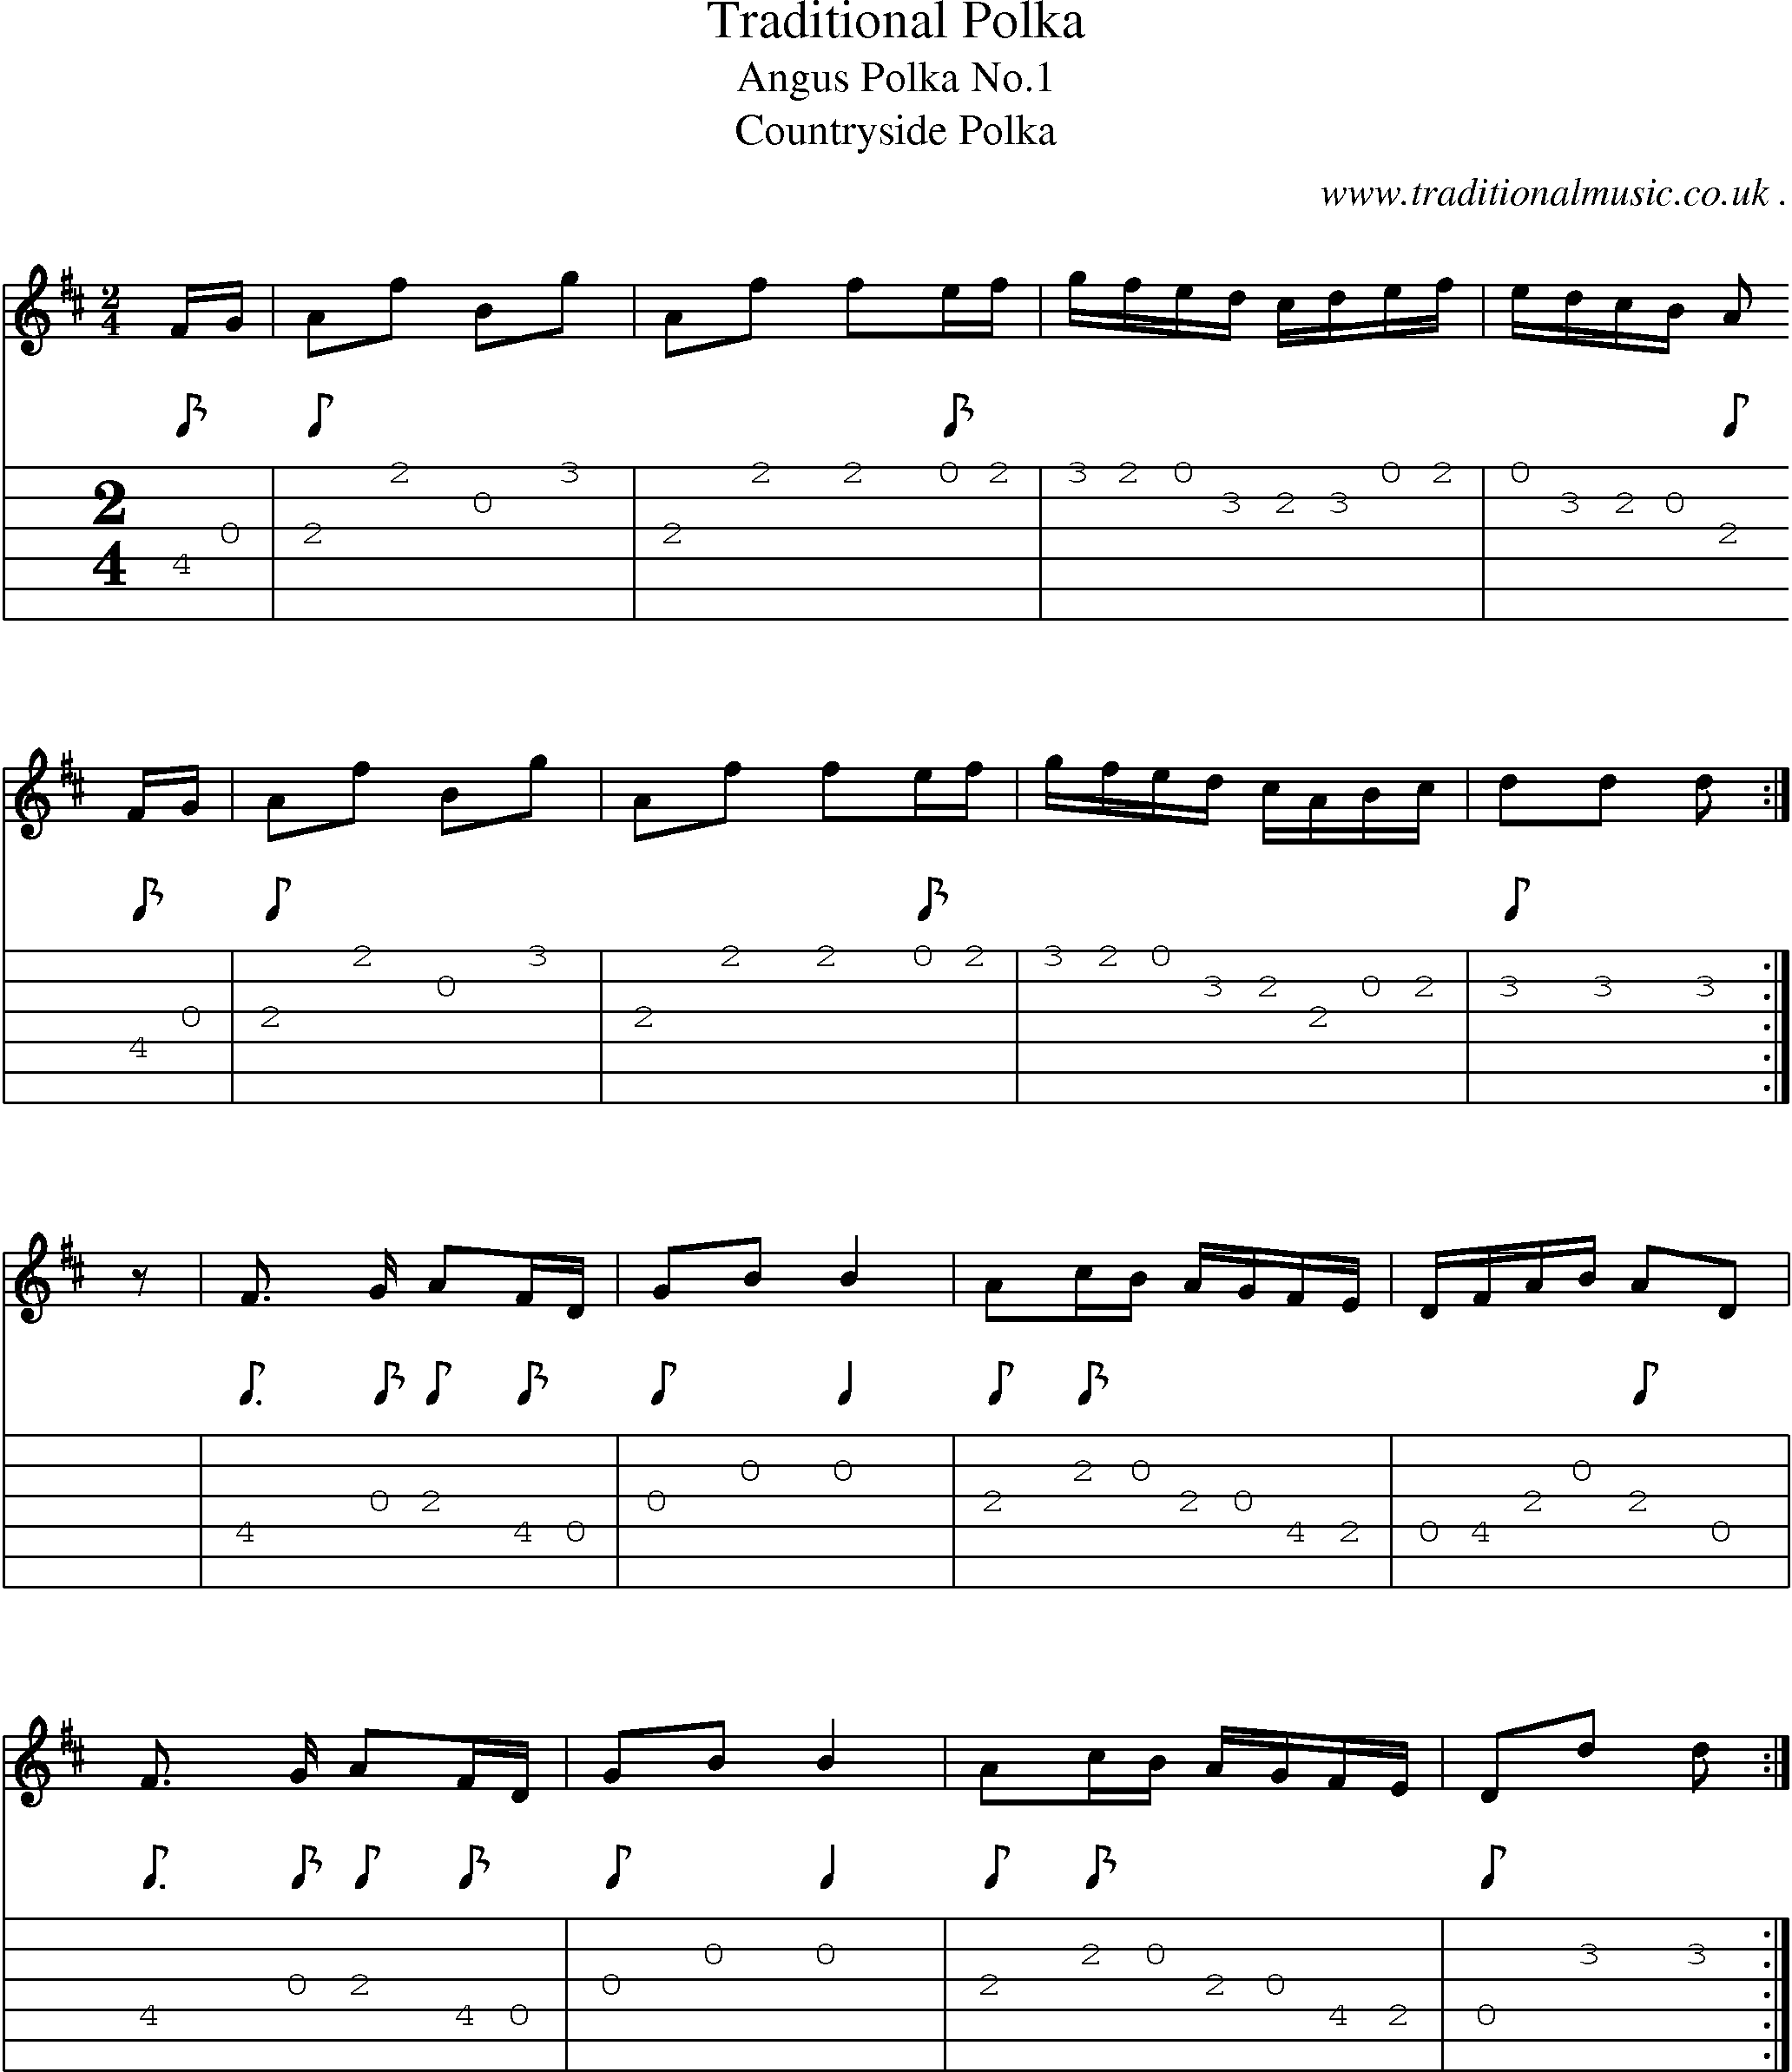 Sheet-music  score, Chords and Guitar Tabs for Traditional Polka